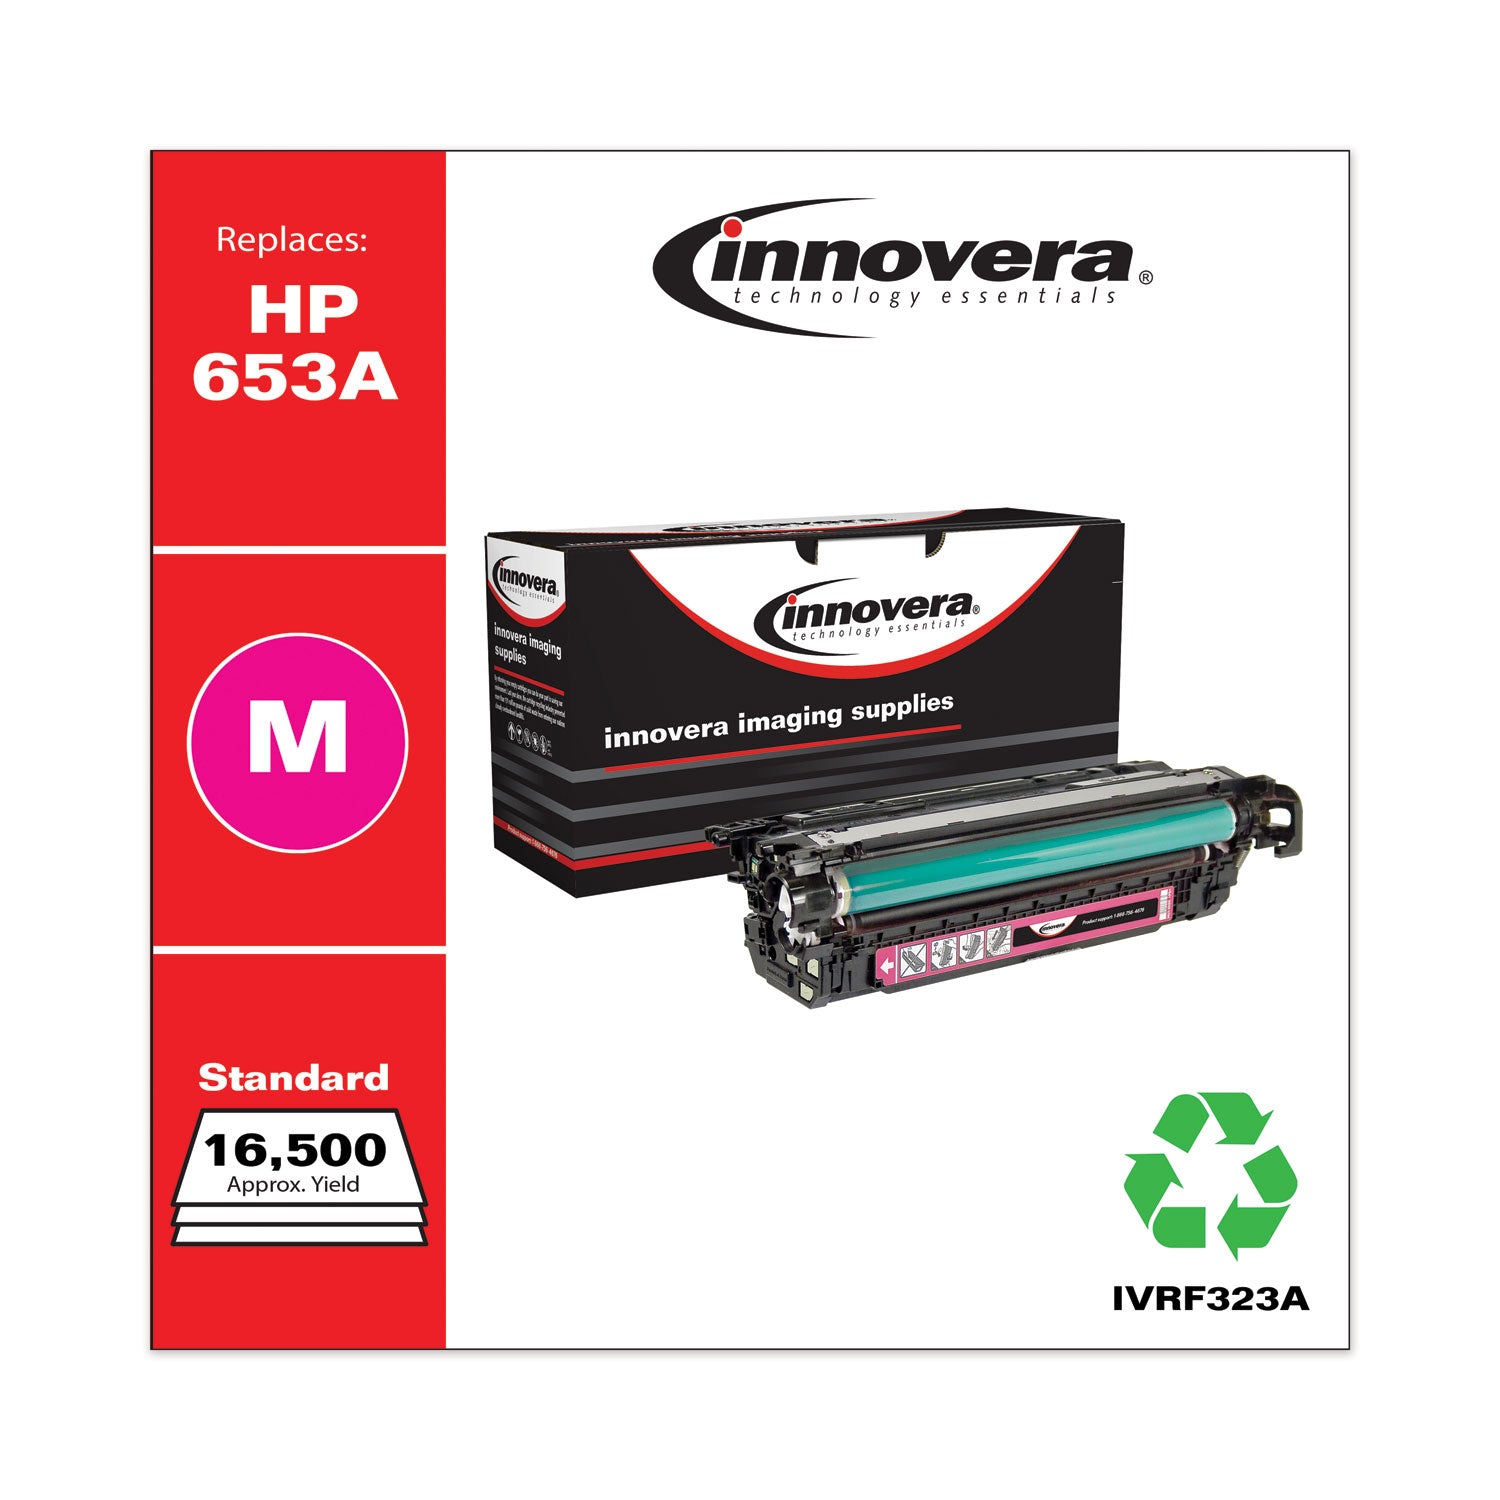 remanufactured-magenta-toner-replacement-for-653a-cf323a-16500-page-yield_ivrf323a - 2